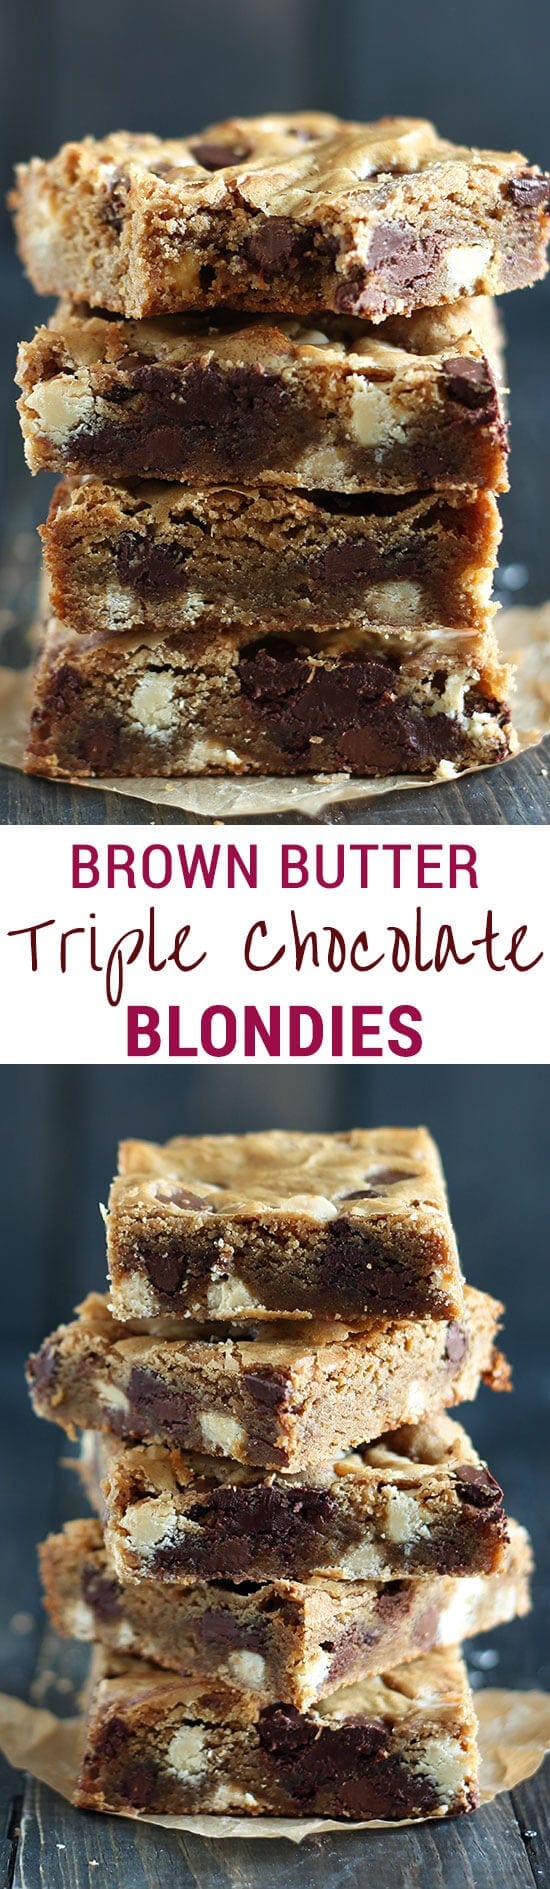 BEST BLONDIES. Outrageously chewy with tons of nutty butterscotch flavor and three kinds of chocolate! Brown Butter Triple Chocolate Blondie recipe.